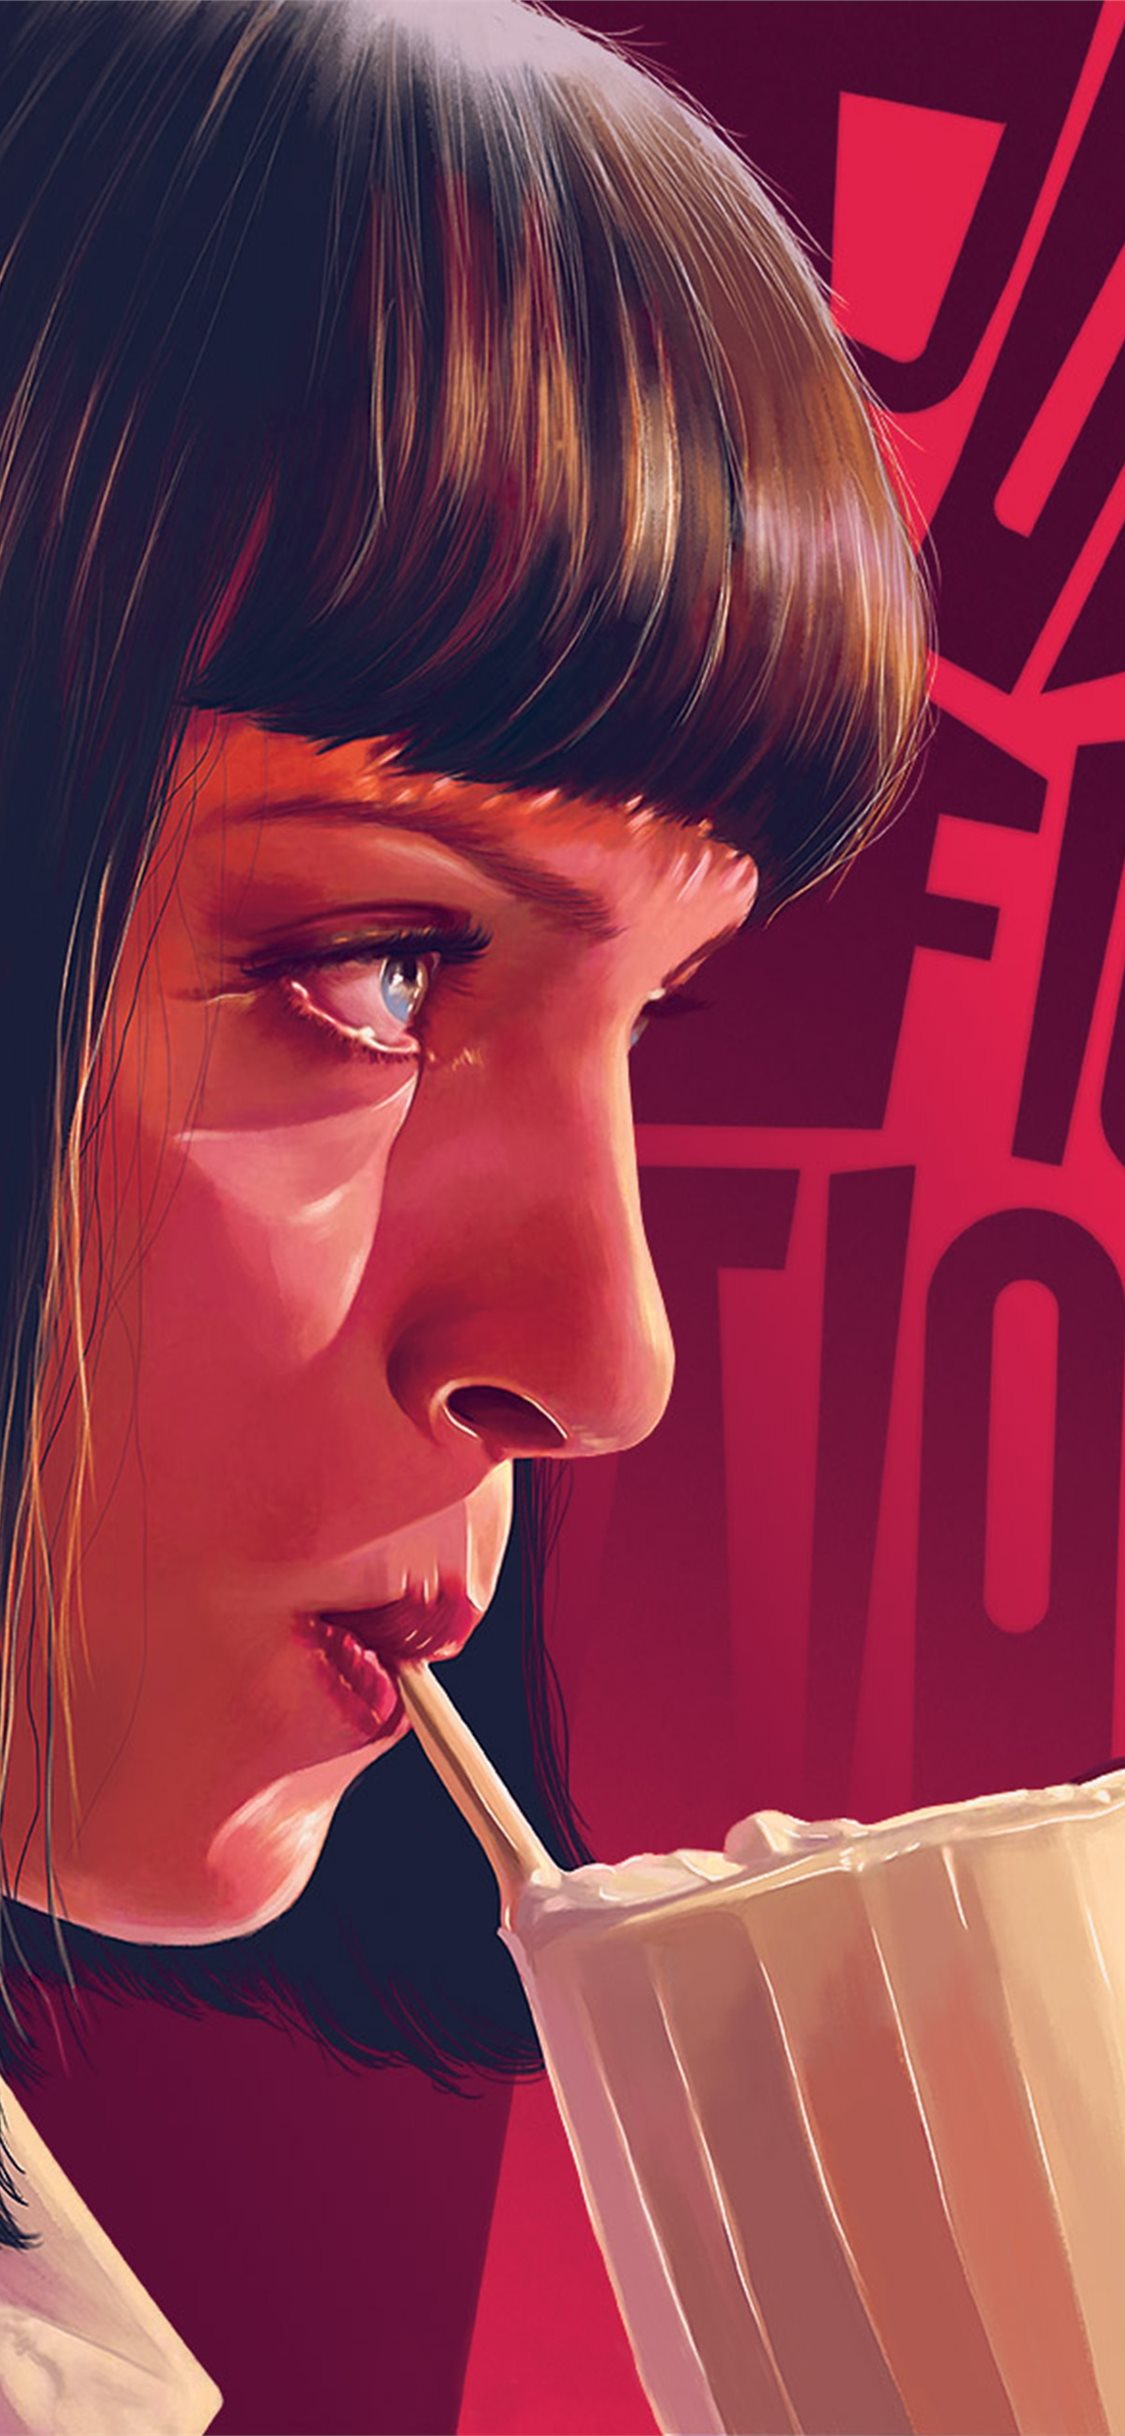 40 Pulp Fiction HD Wallpapers and Backgrounds